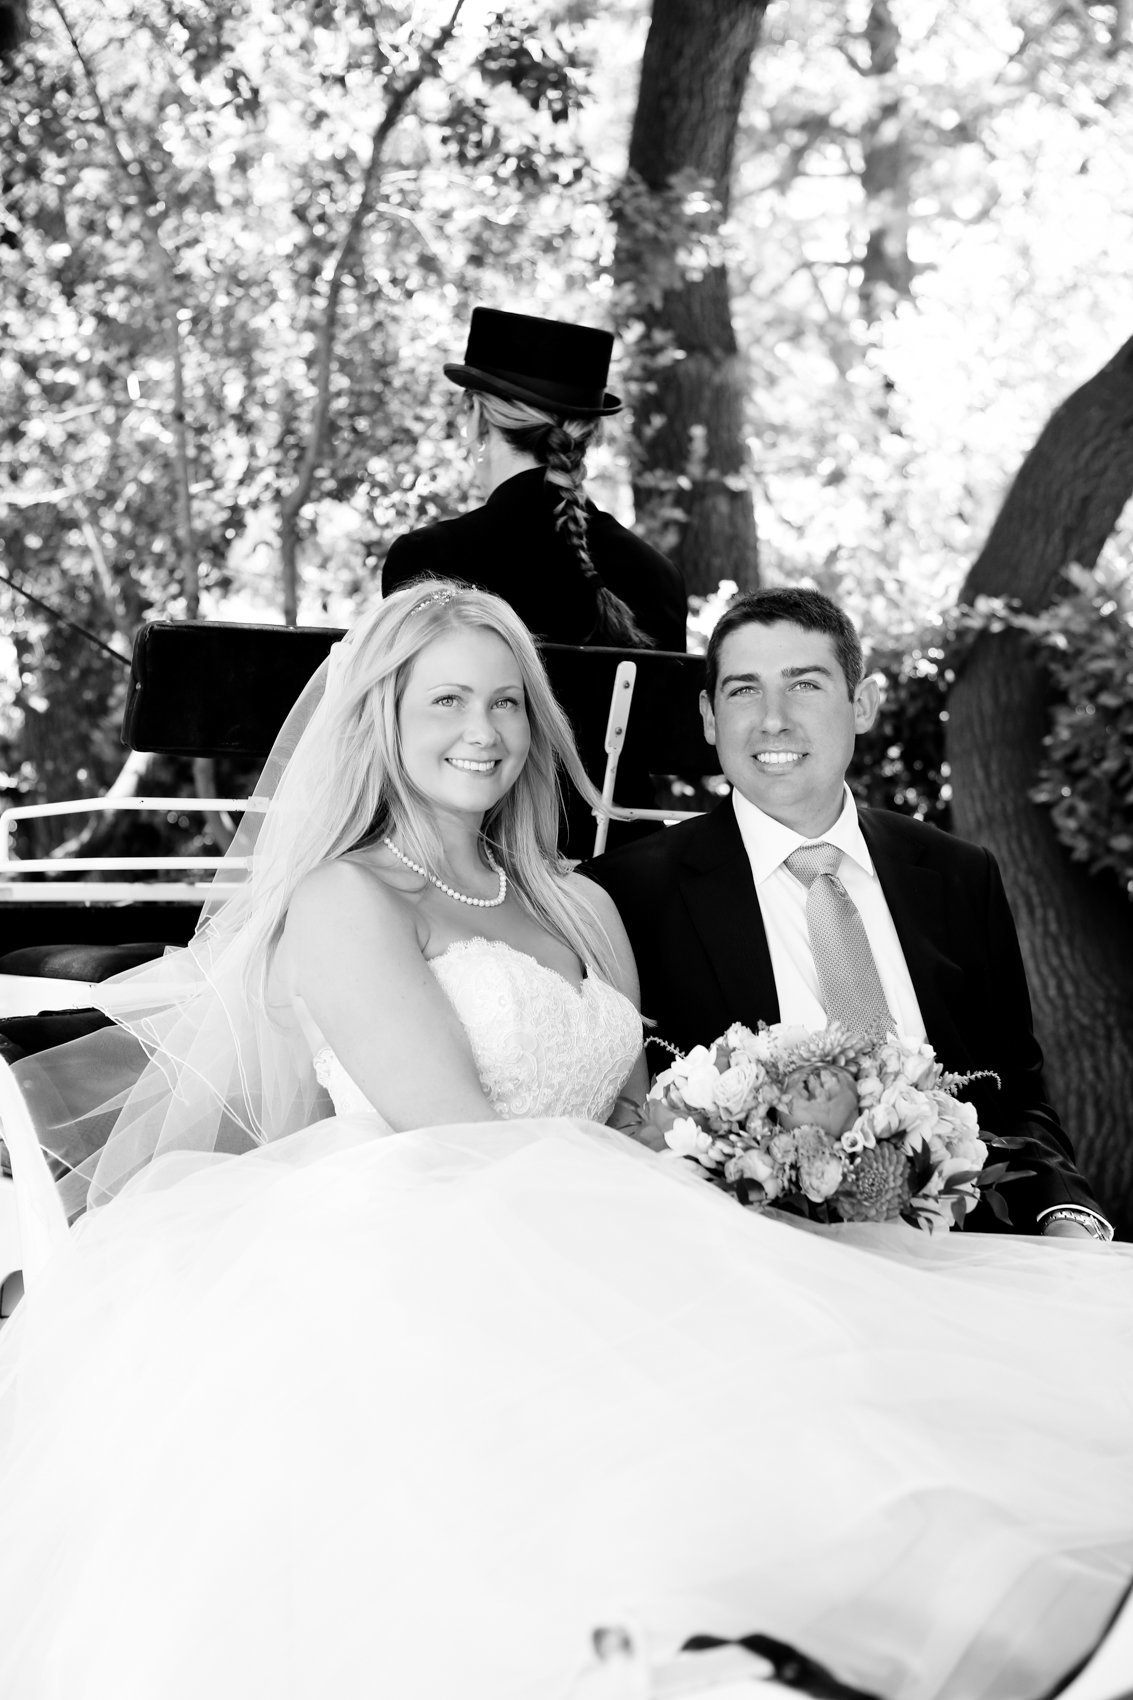 Wedding photographer black and white session couple in carriage